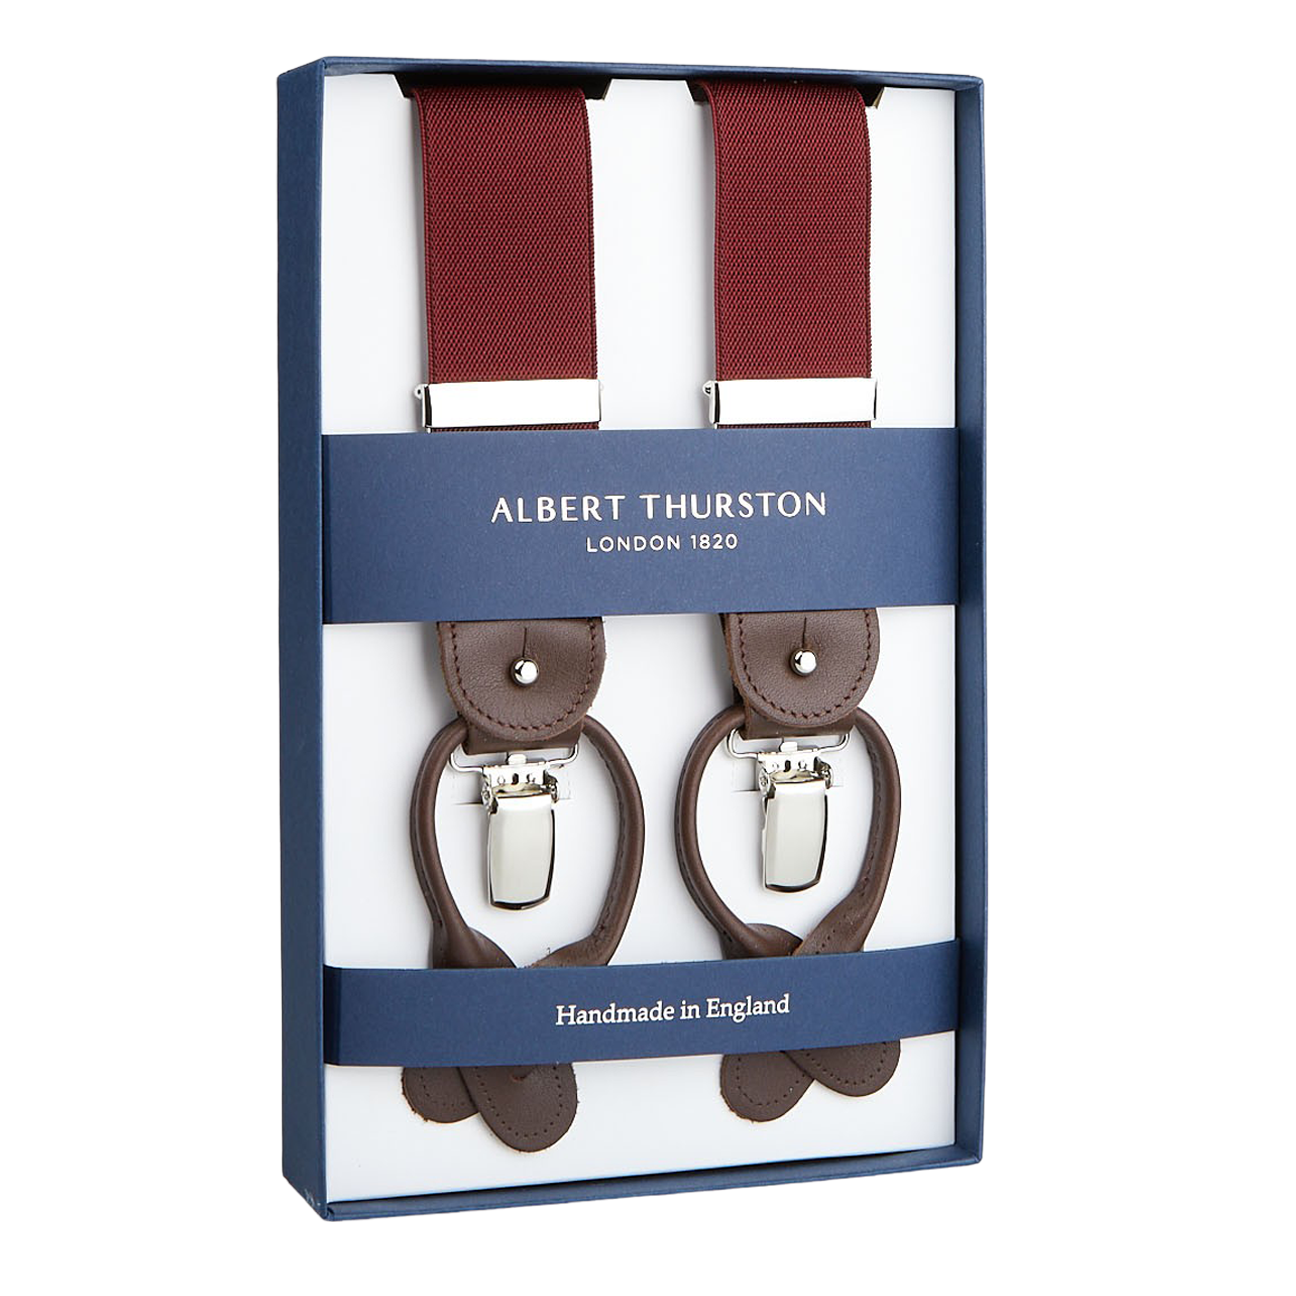 A pair of Albert Thurston Wine Red Nylon Elastic 35mm braces with leather accents, presented in a box.